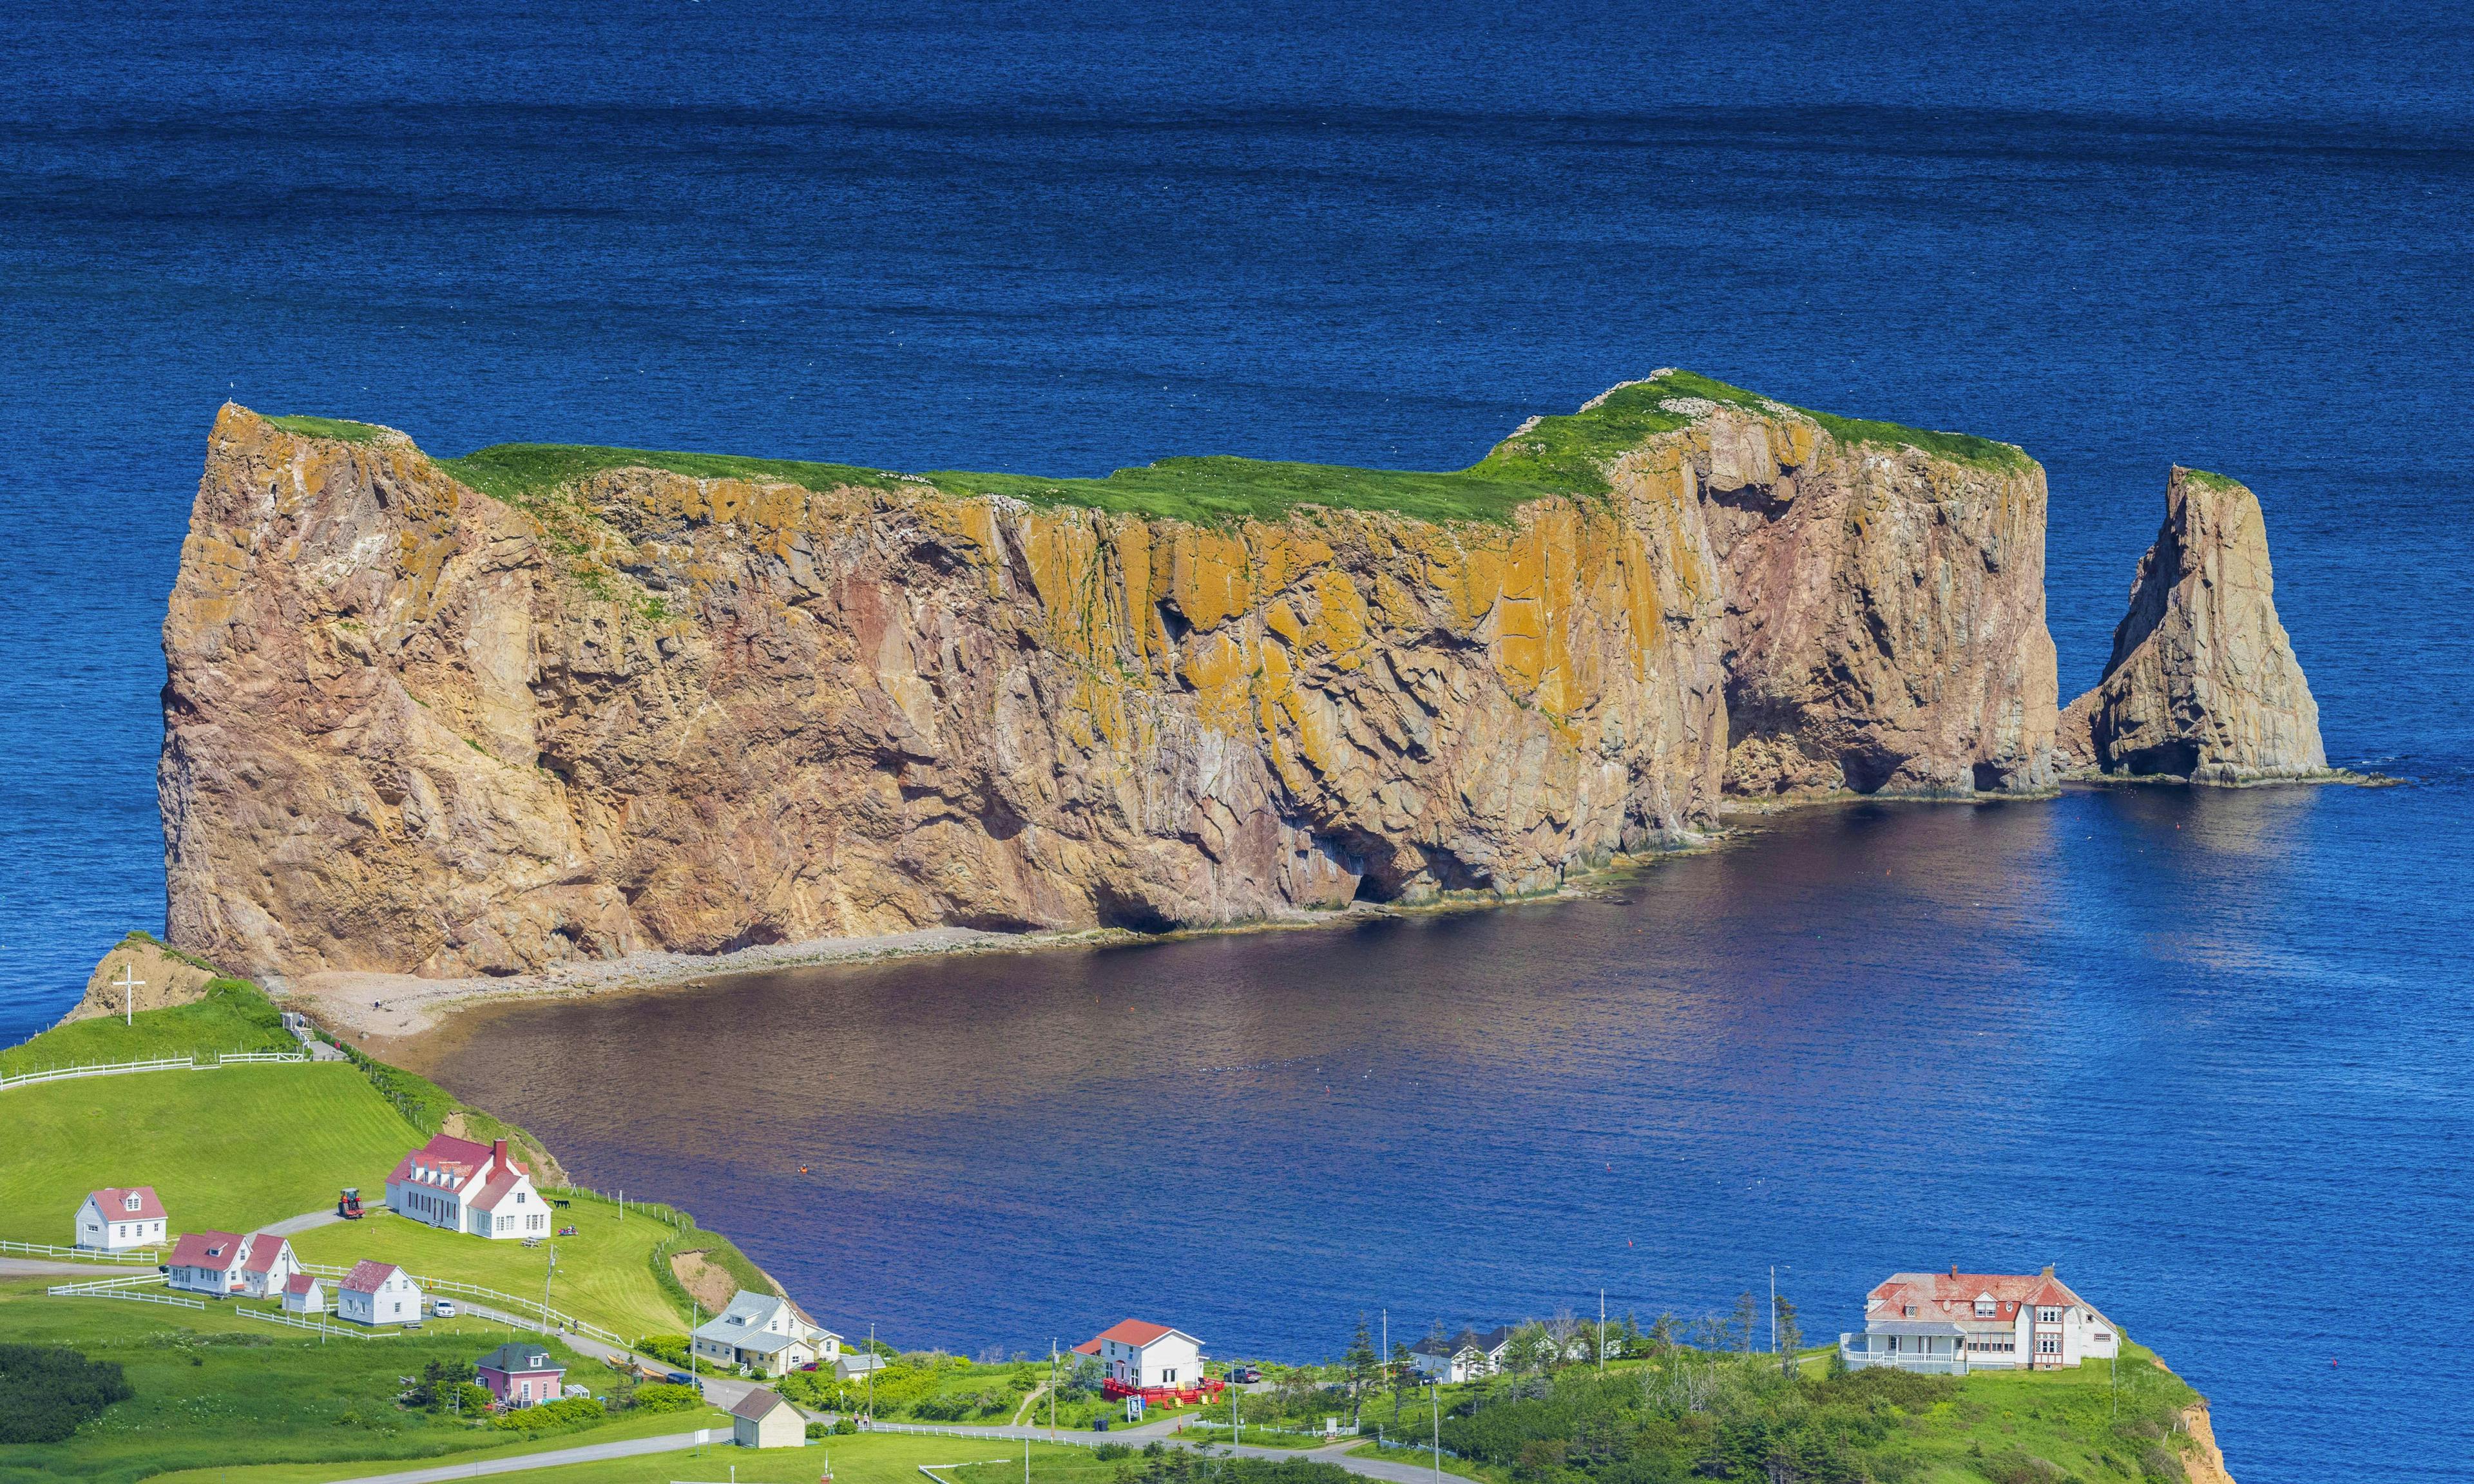 A look at the small town of Percé and its famous Rocher Percé (Perce Rock), part of Gaspe peninsula in Québec.